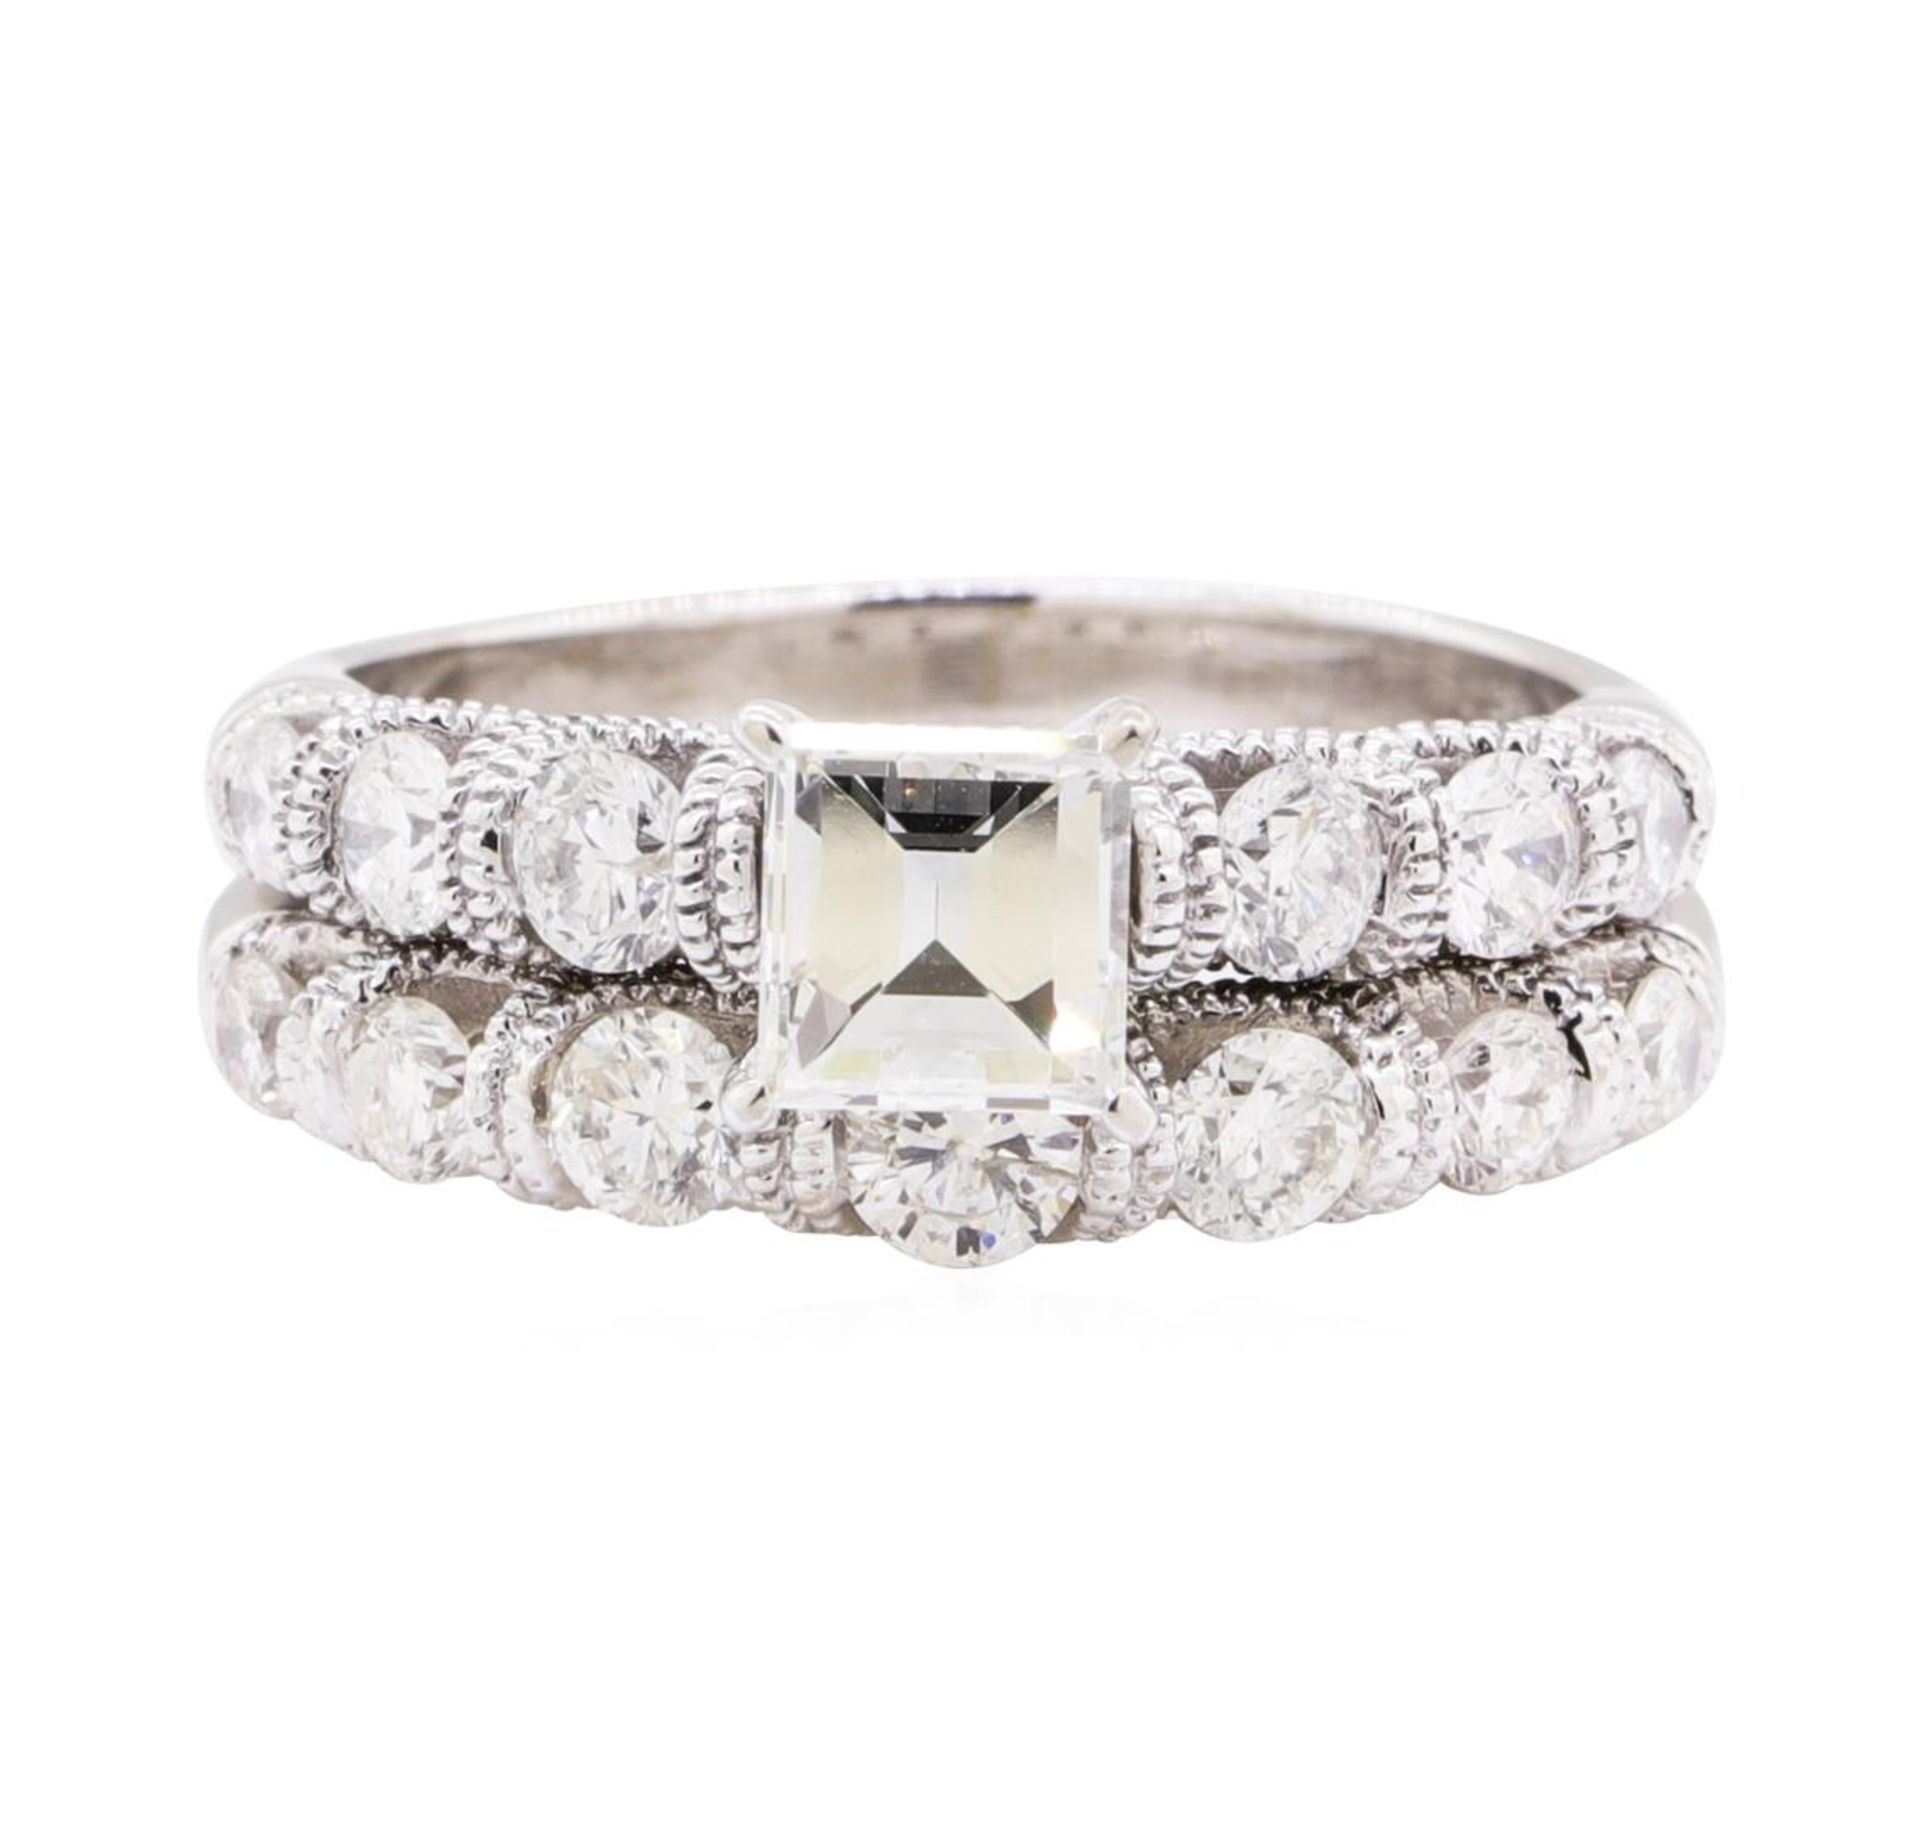 1.68 ctw Diamond Ring And Attached Band - 14KT White Gold - Image 2 of 5